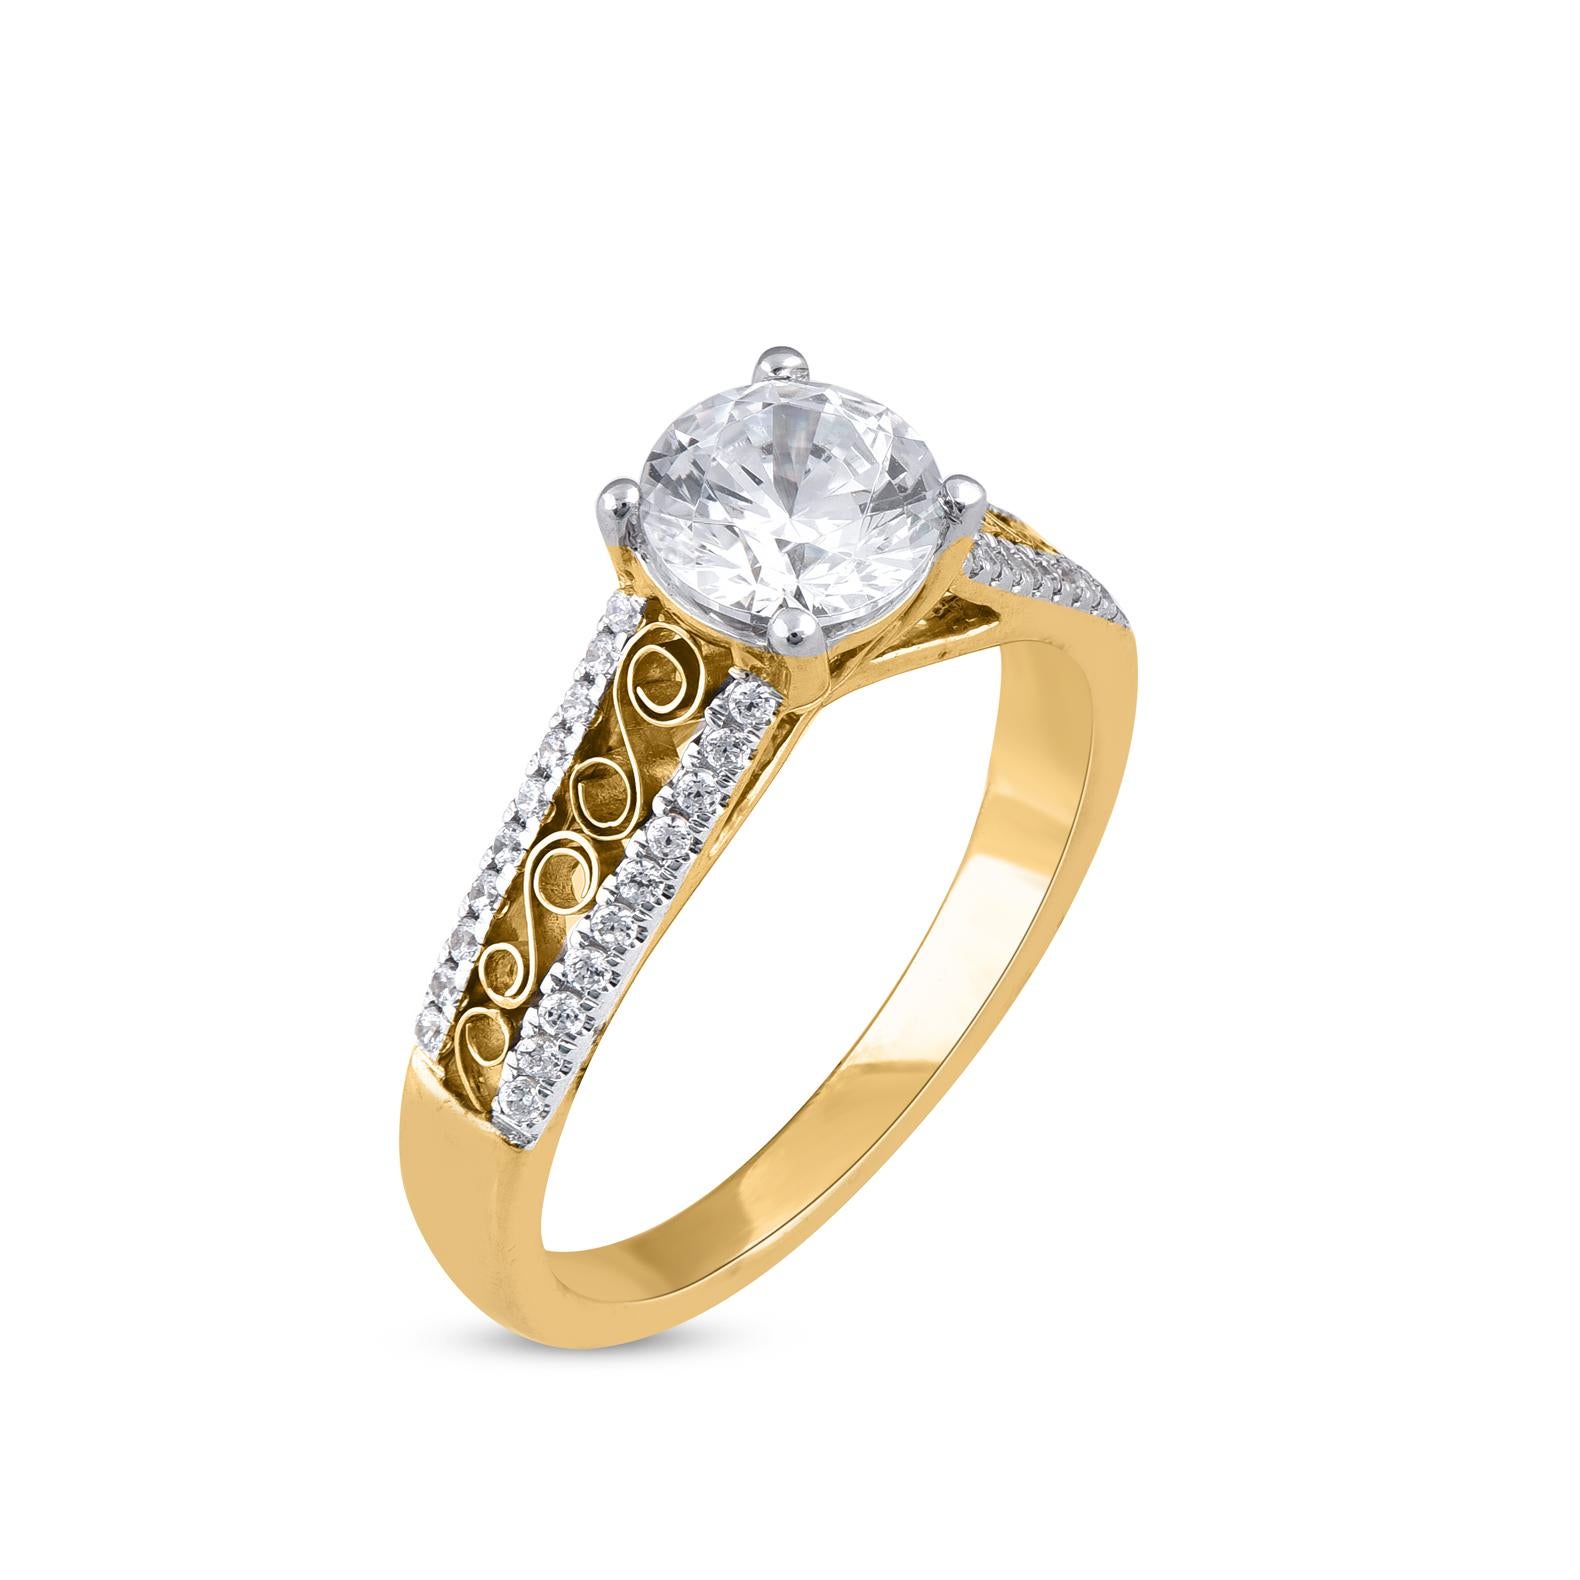 Contemporary TJD 1.20 Carat Round Cut Diamond 14KT Yellow Gold Vintage Style Engagement Ring For Sale